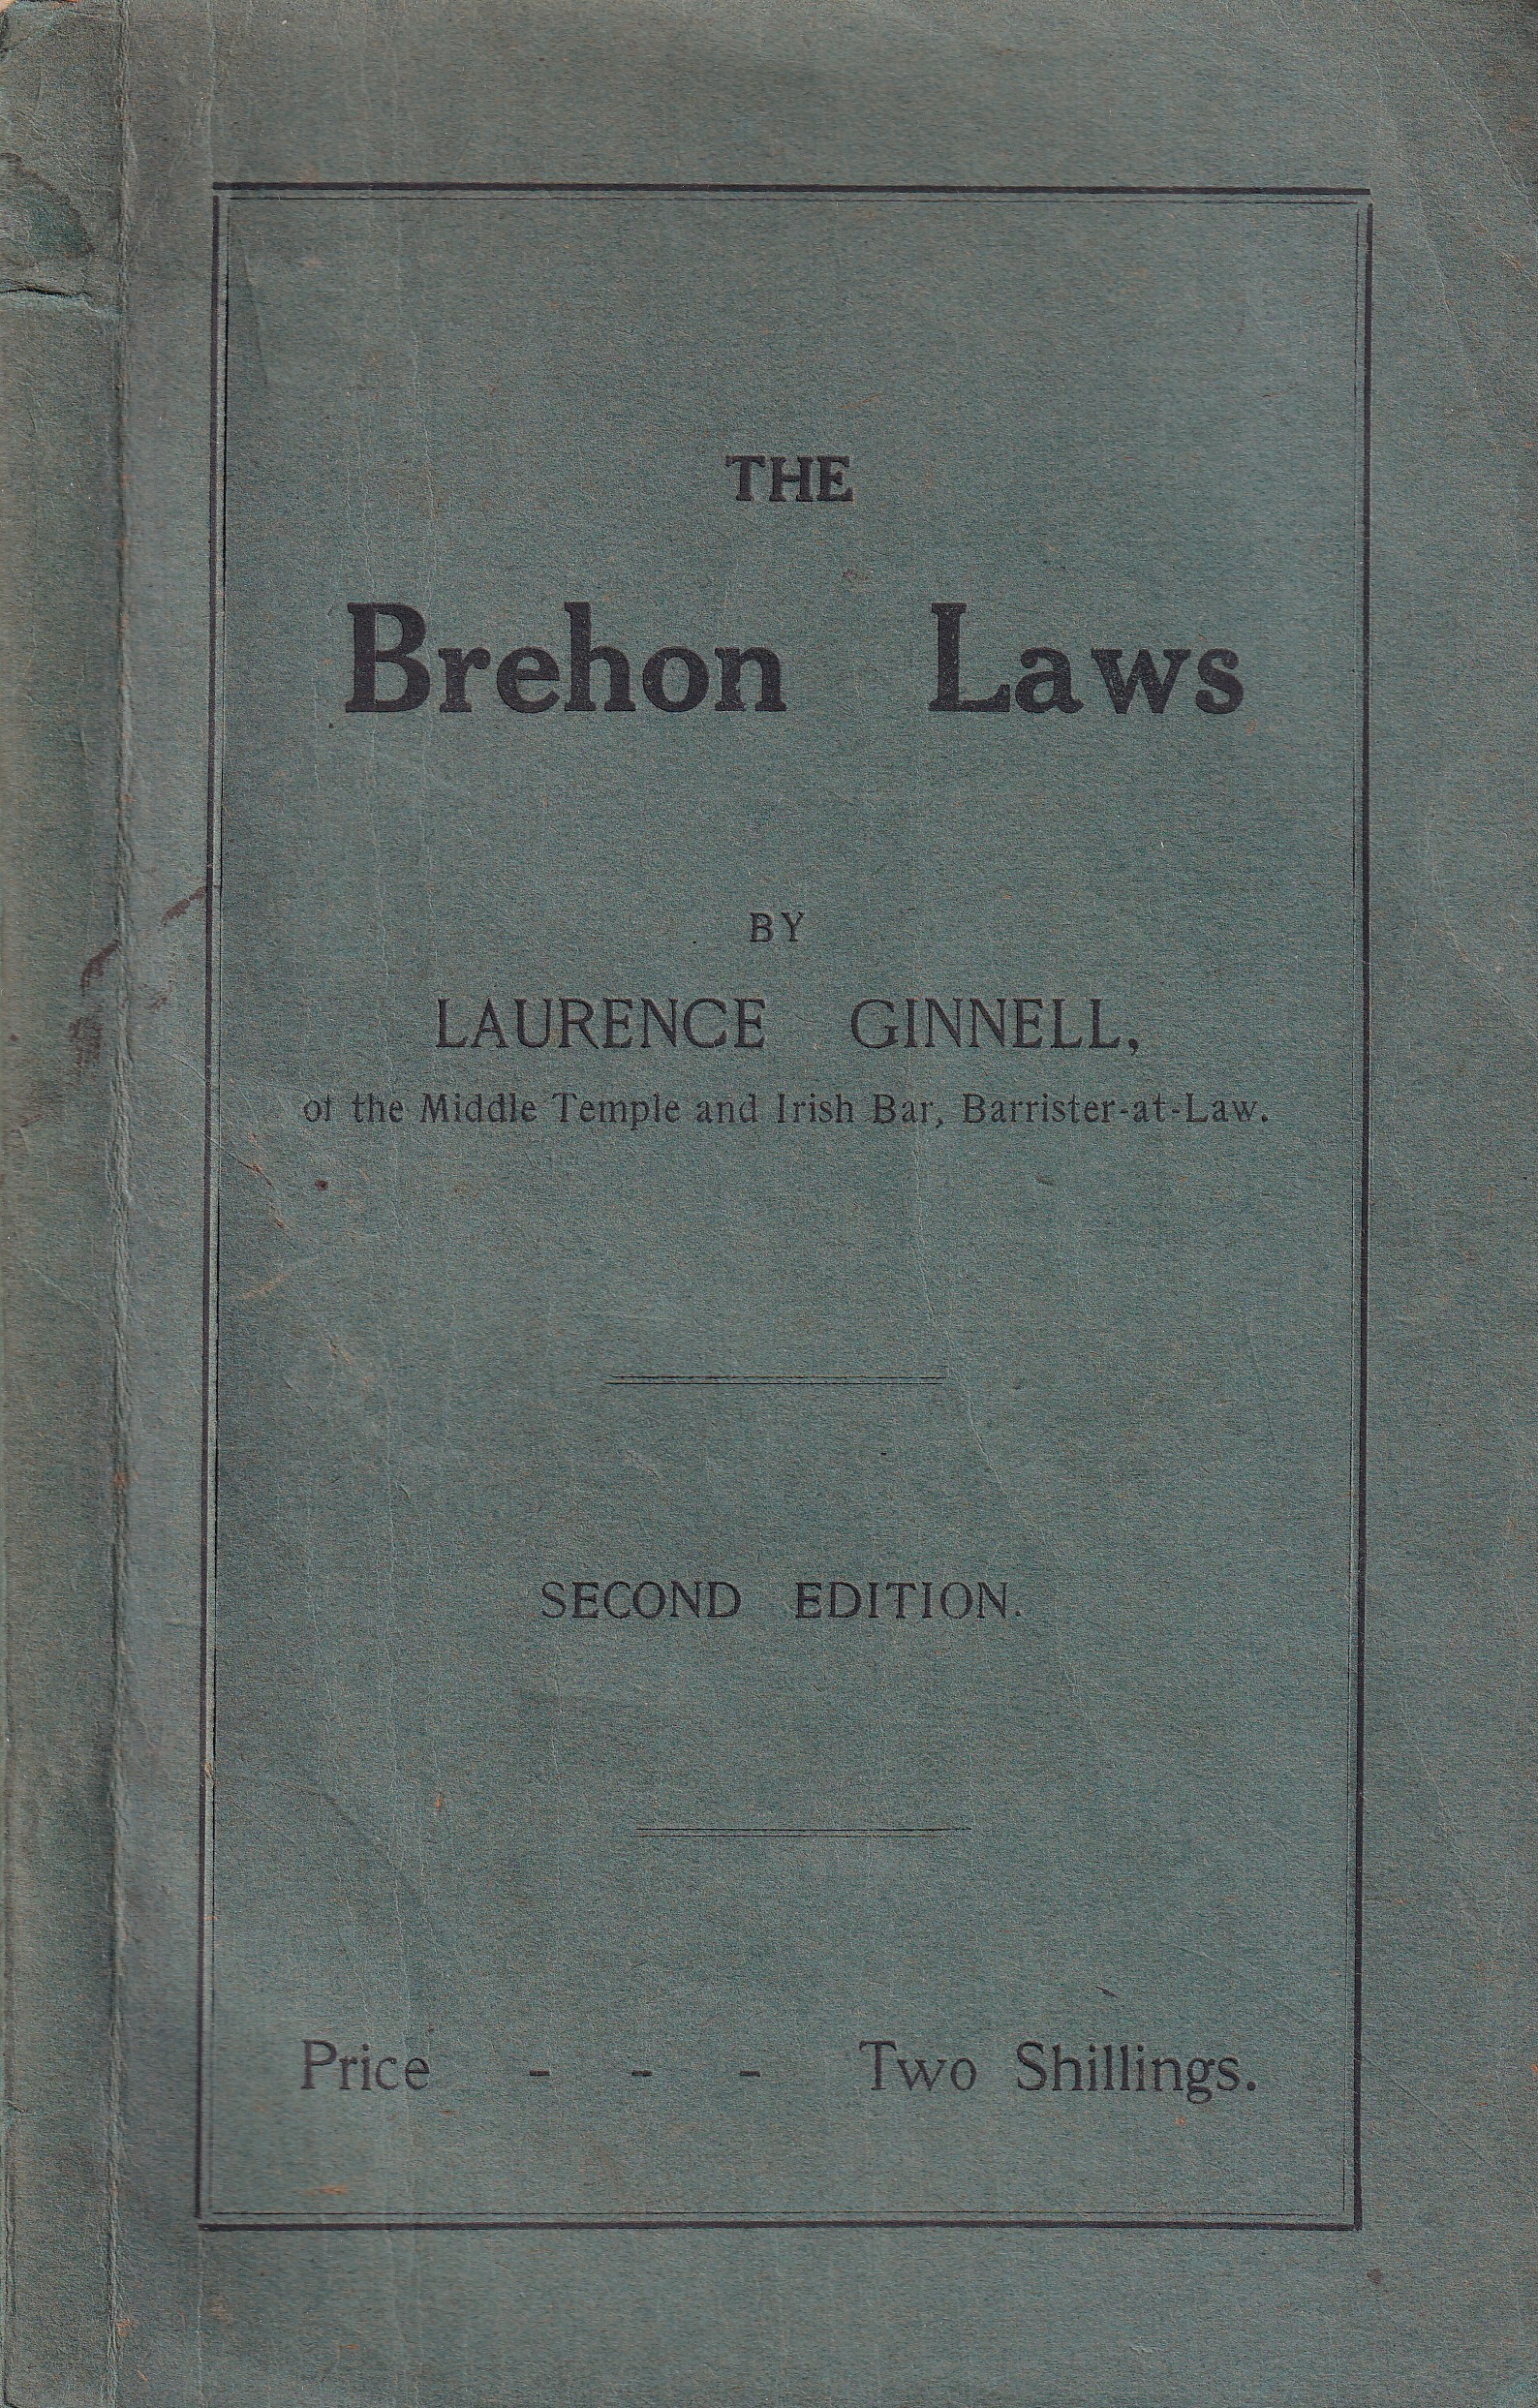 The Brehon Laws: A Legal Handbook by Laurence Ginnell